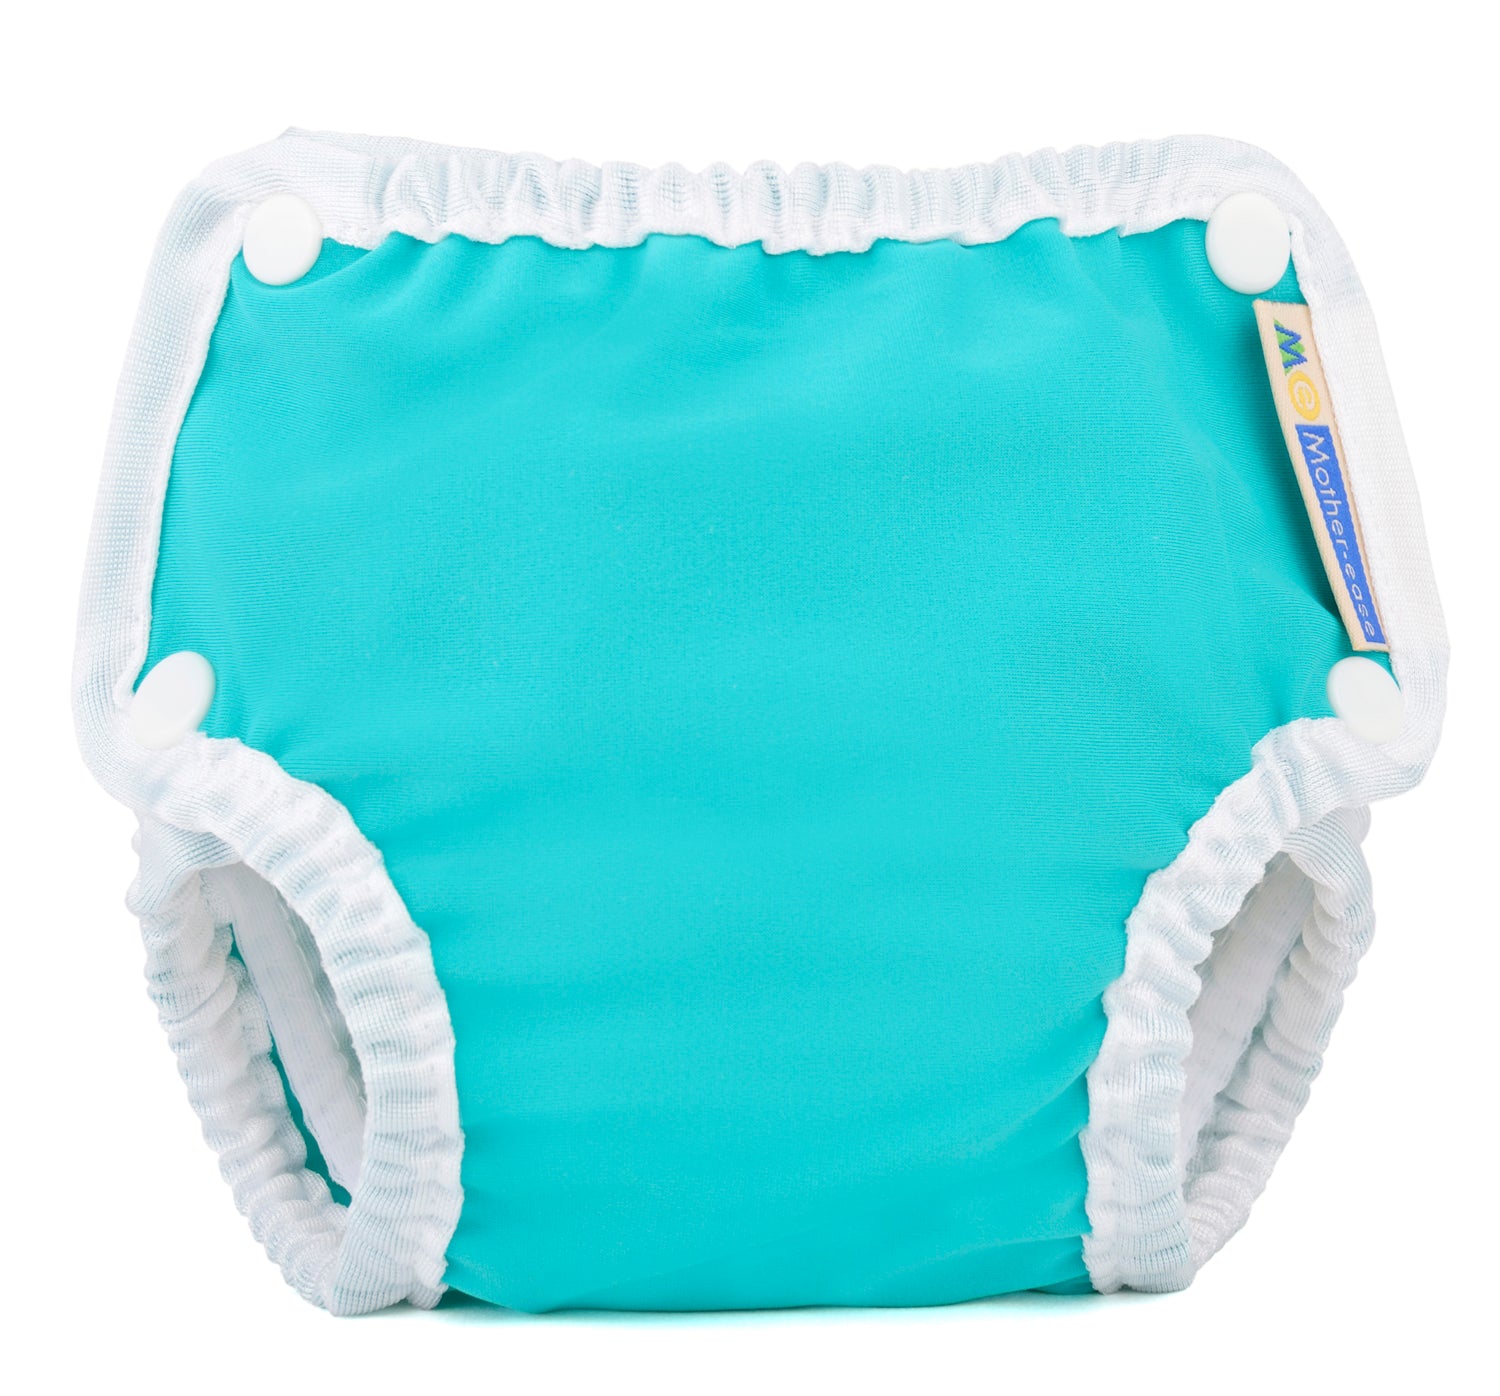 Reusable Swim Diapers – Mother-ease Cloth Diapers